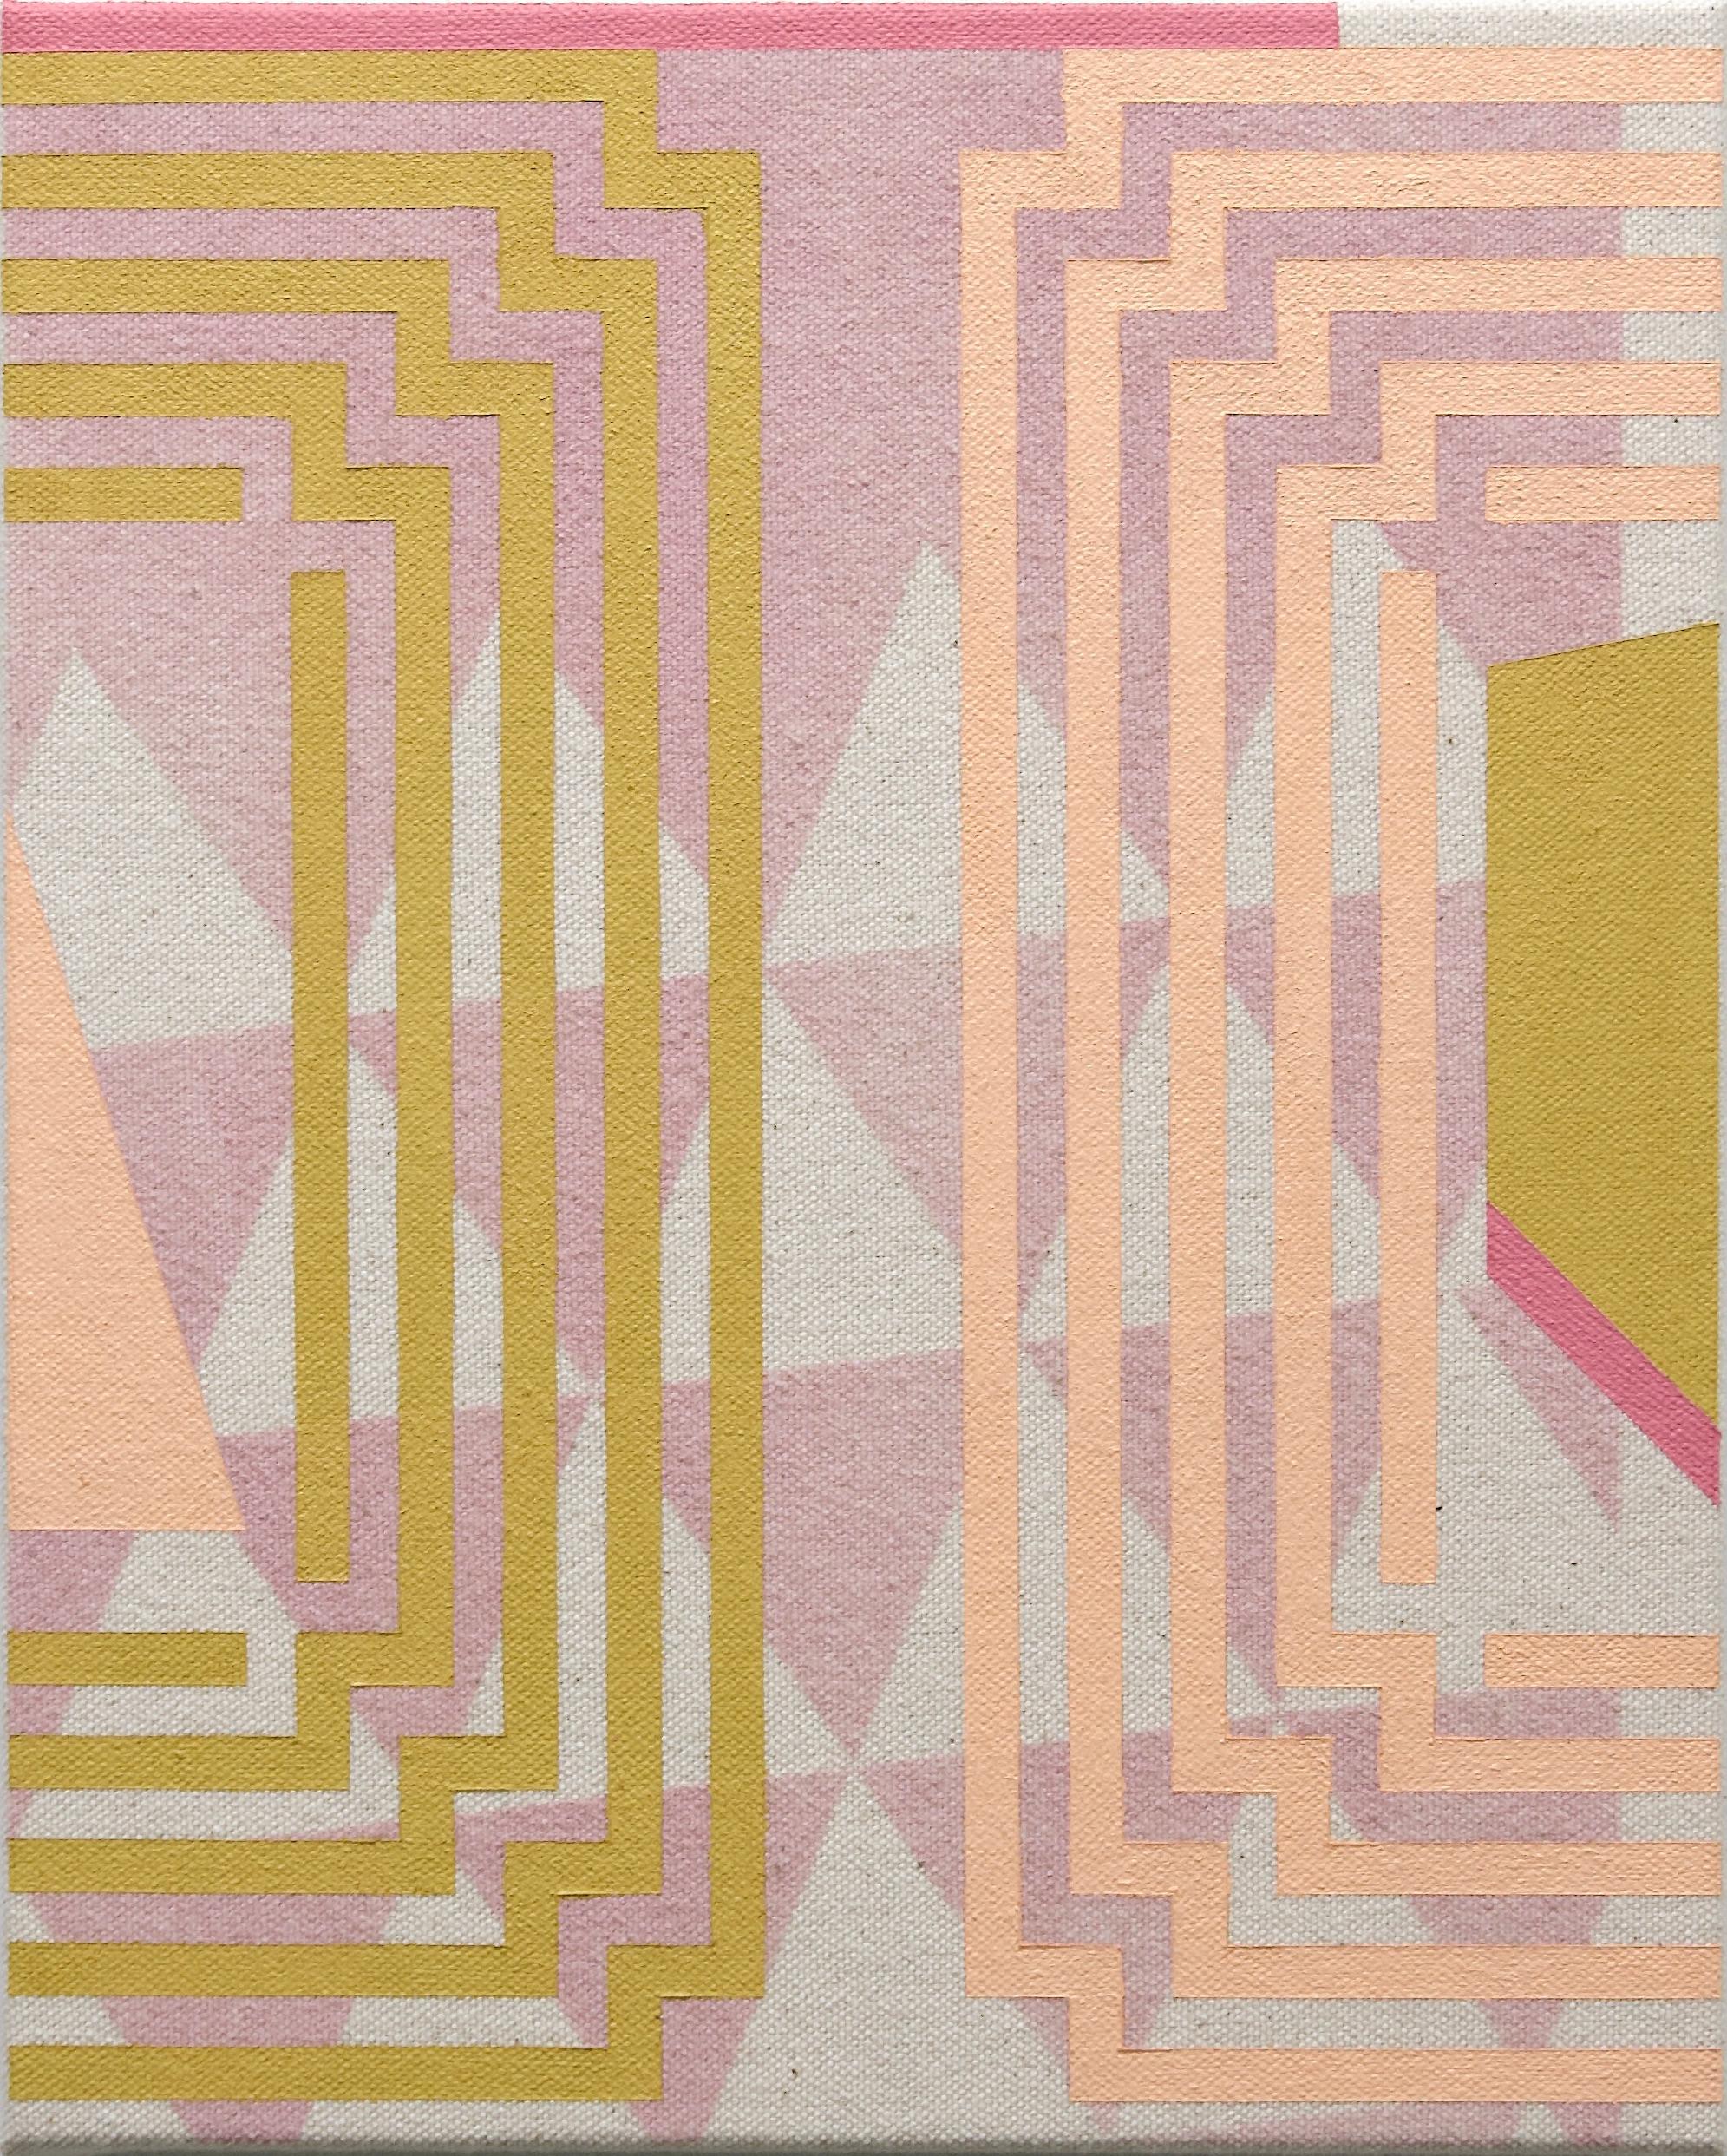 Alex McClurg Abstract Painting - EMBRACING IMPERMANENCE - Abstract Geometric, Pink, Magenta Painting on Canvas 